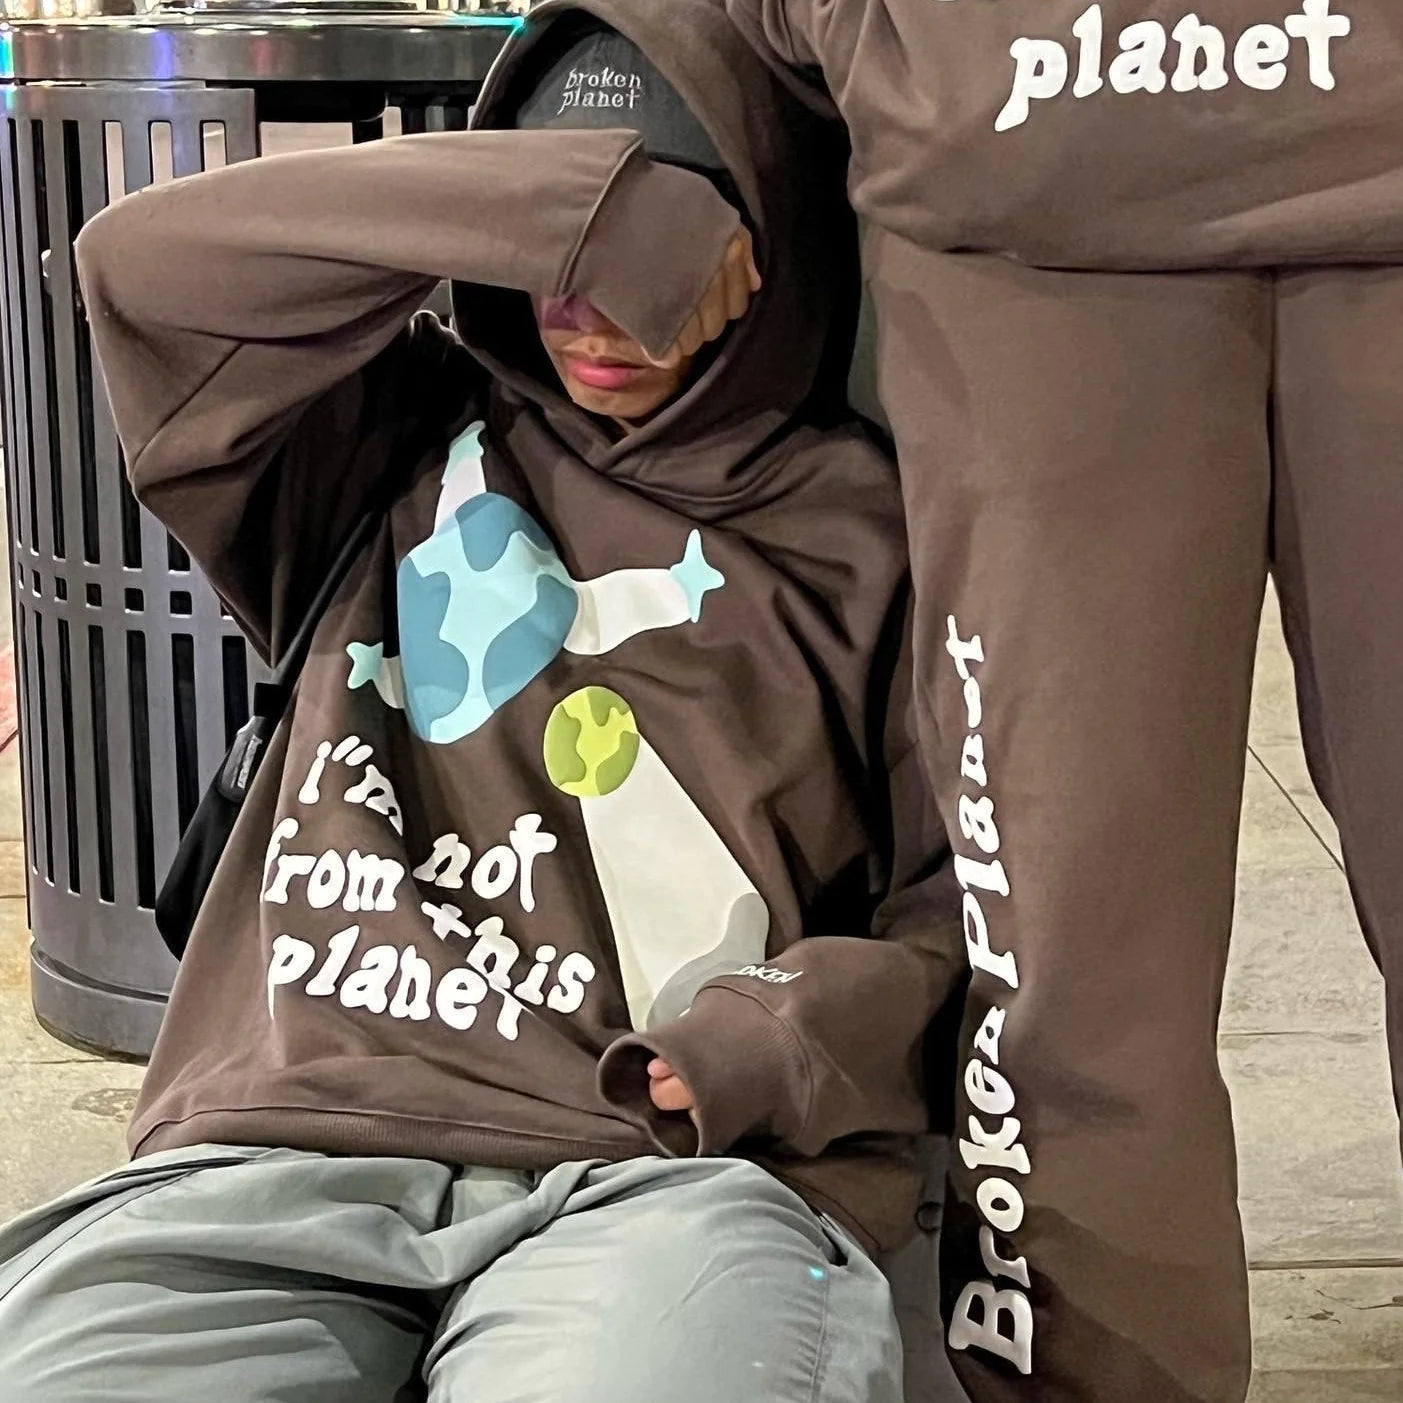 Broken Planet Market 'I'm Not From This Planet' Hoodie - Brown